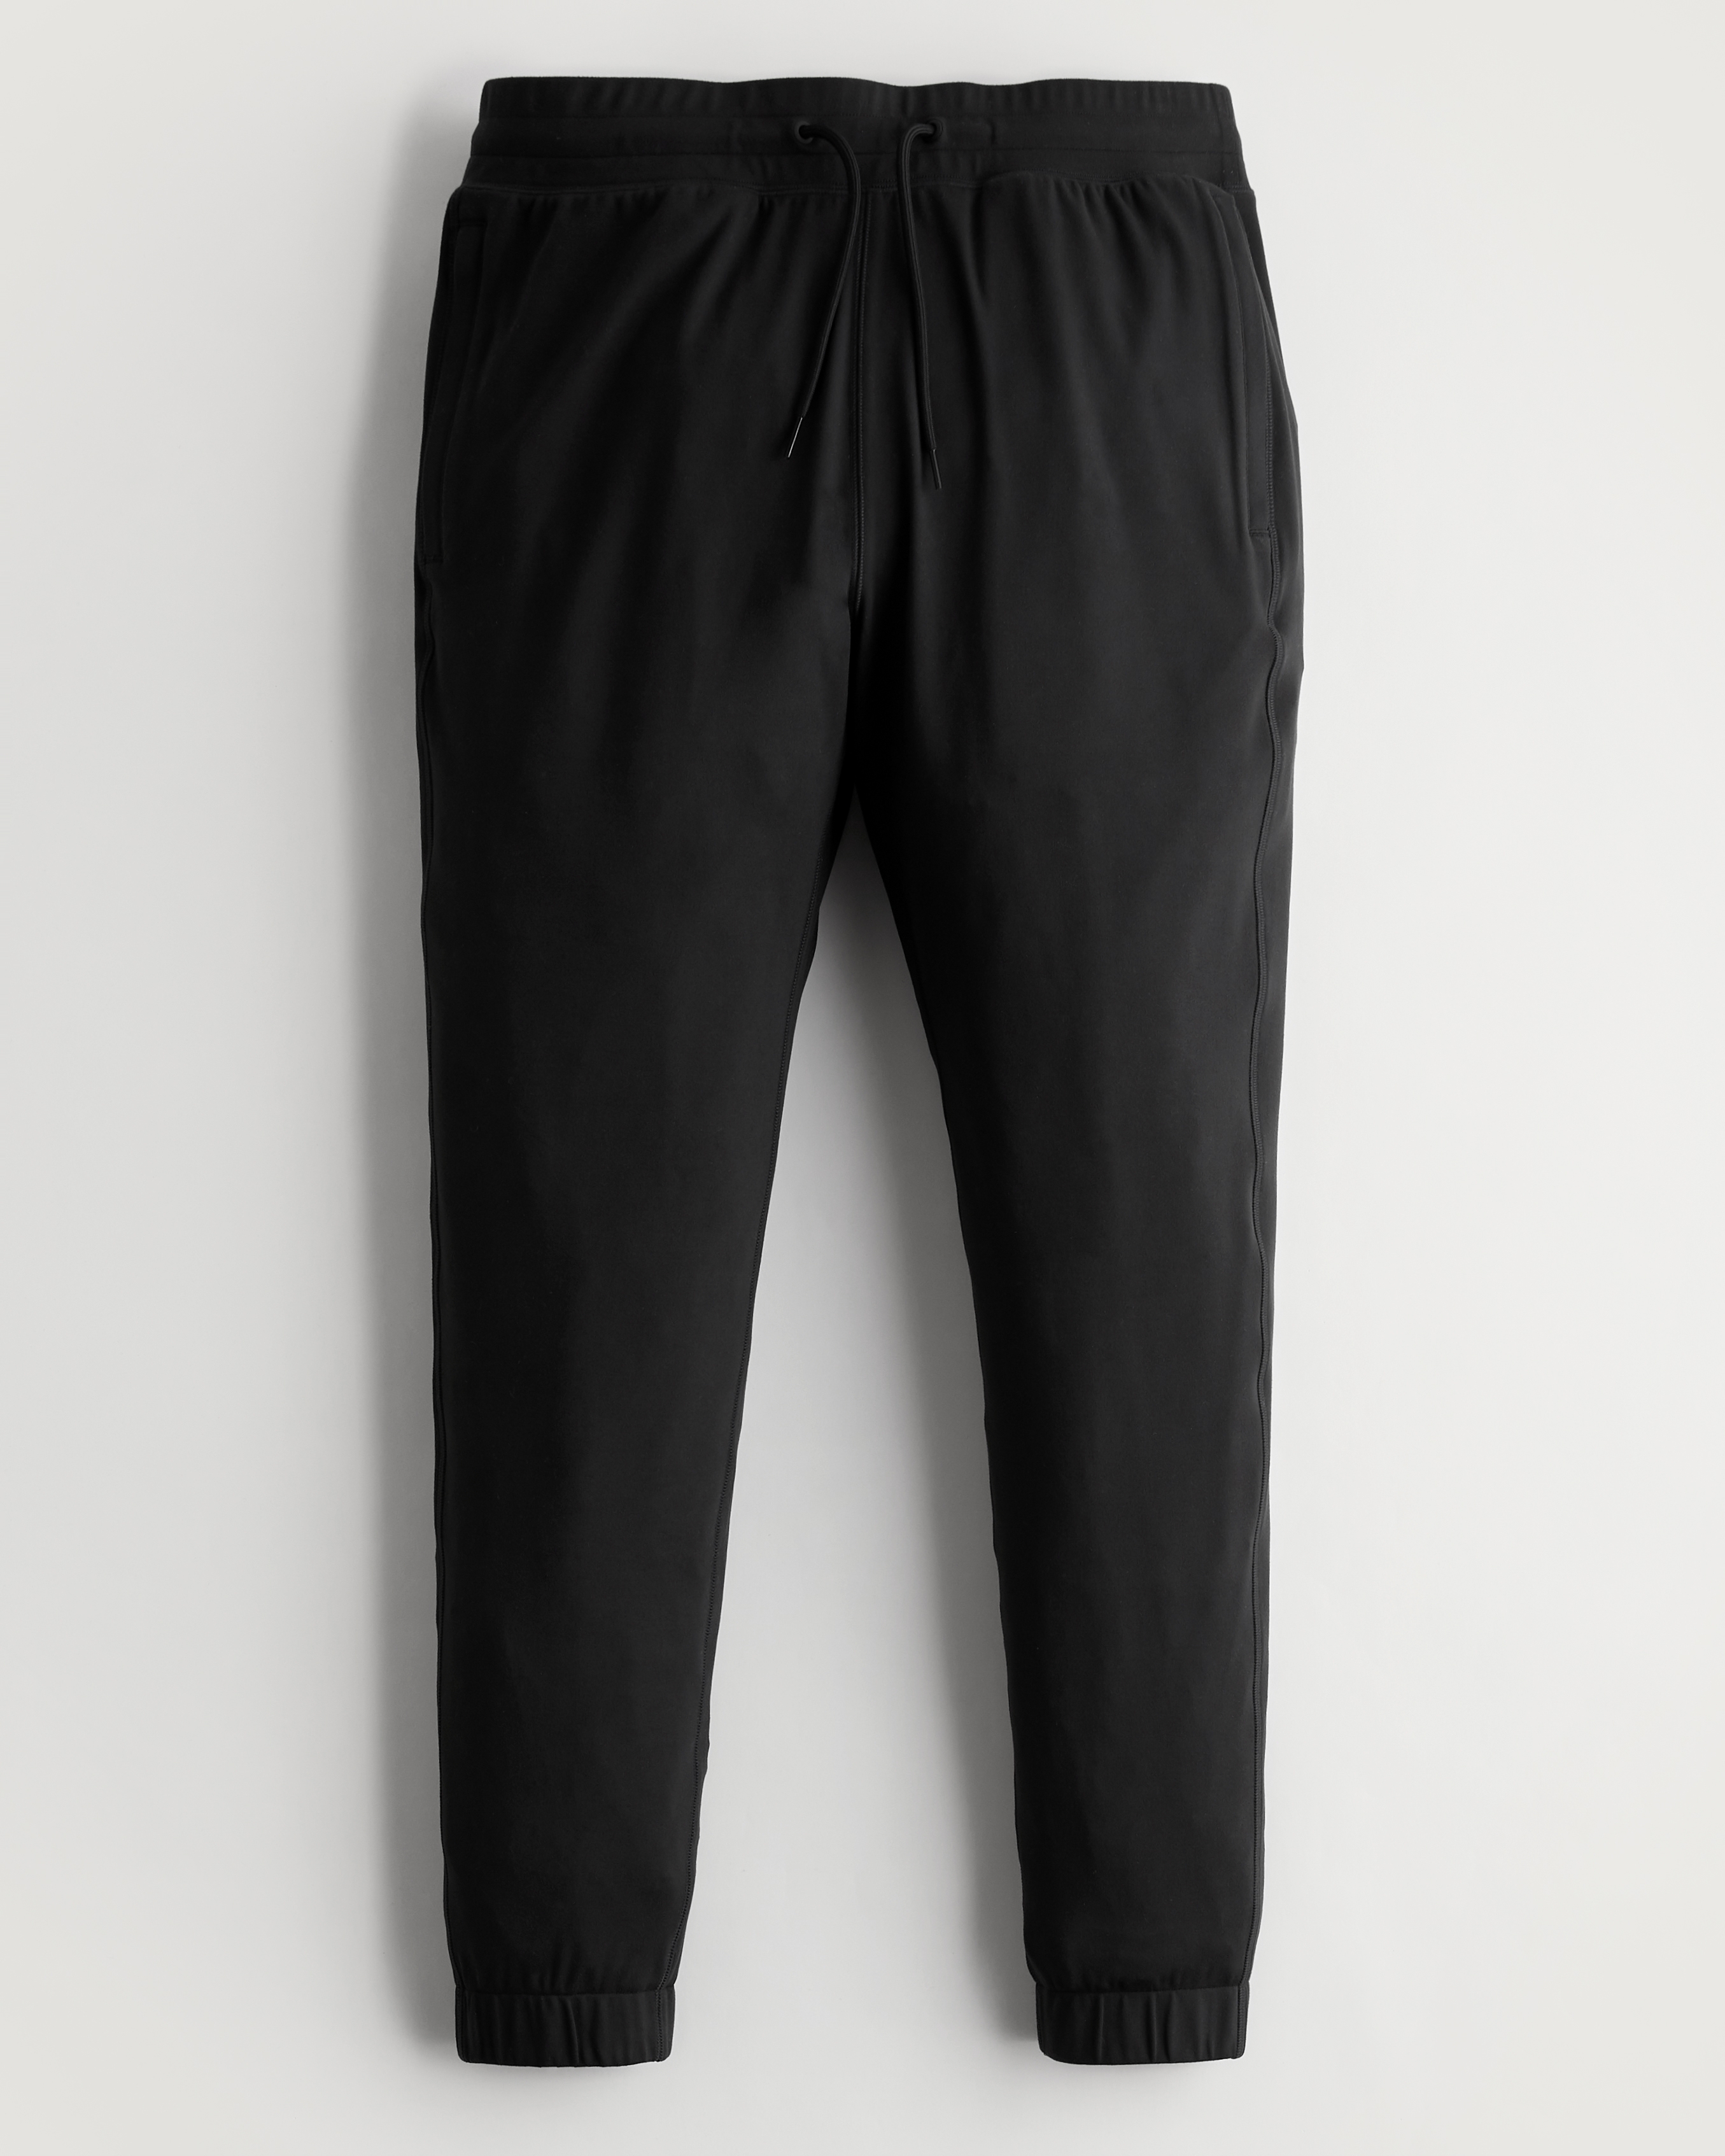 Gilly Hicks Active Recharge Joggers